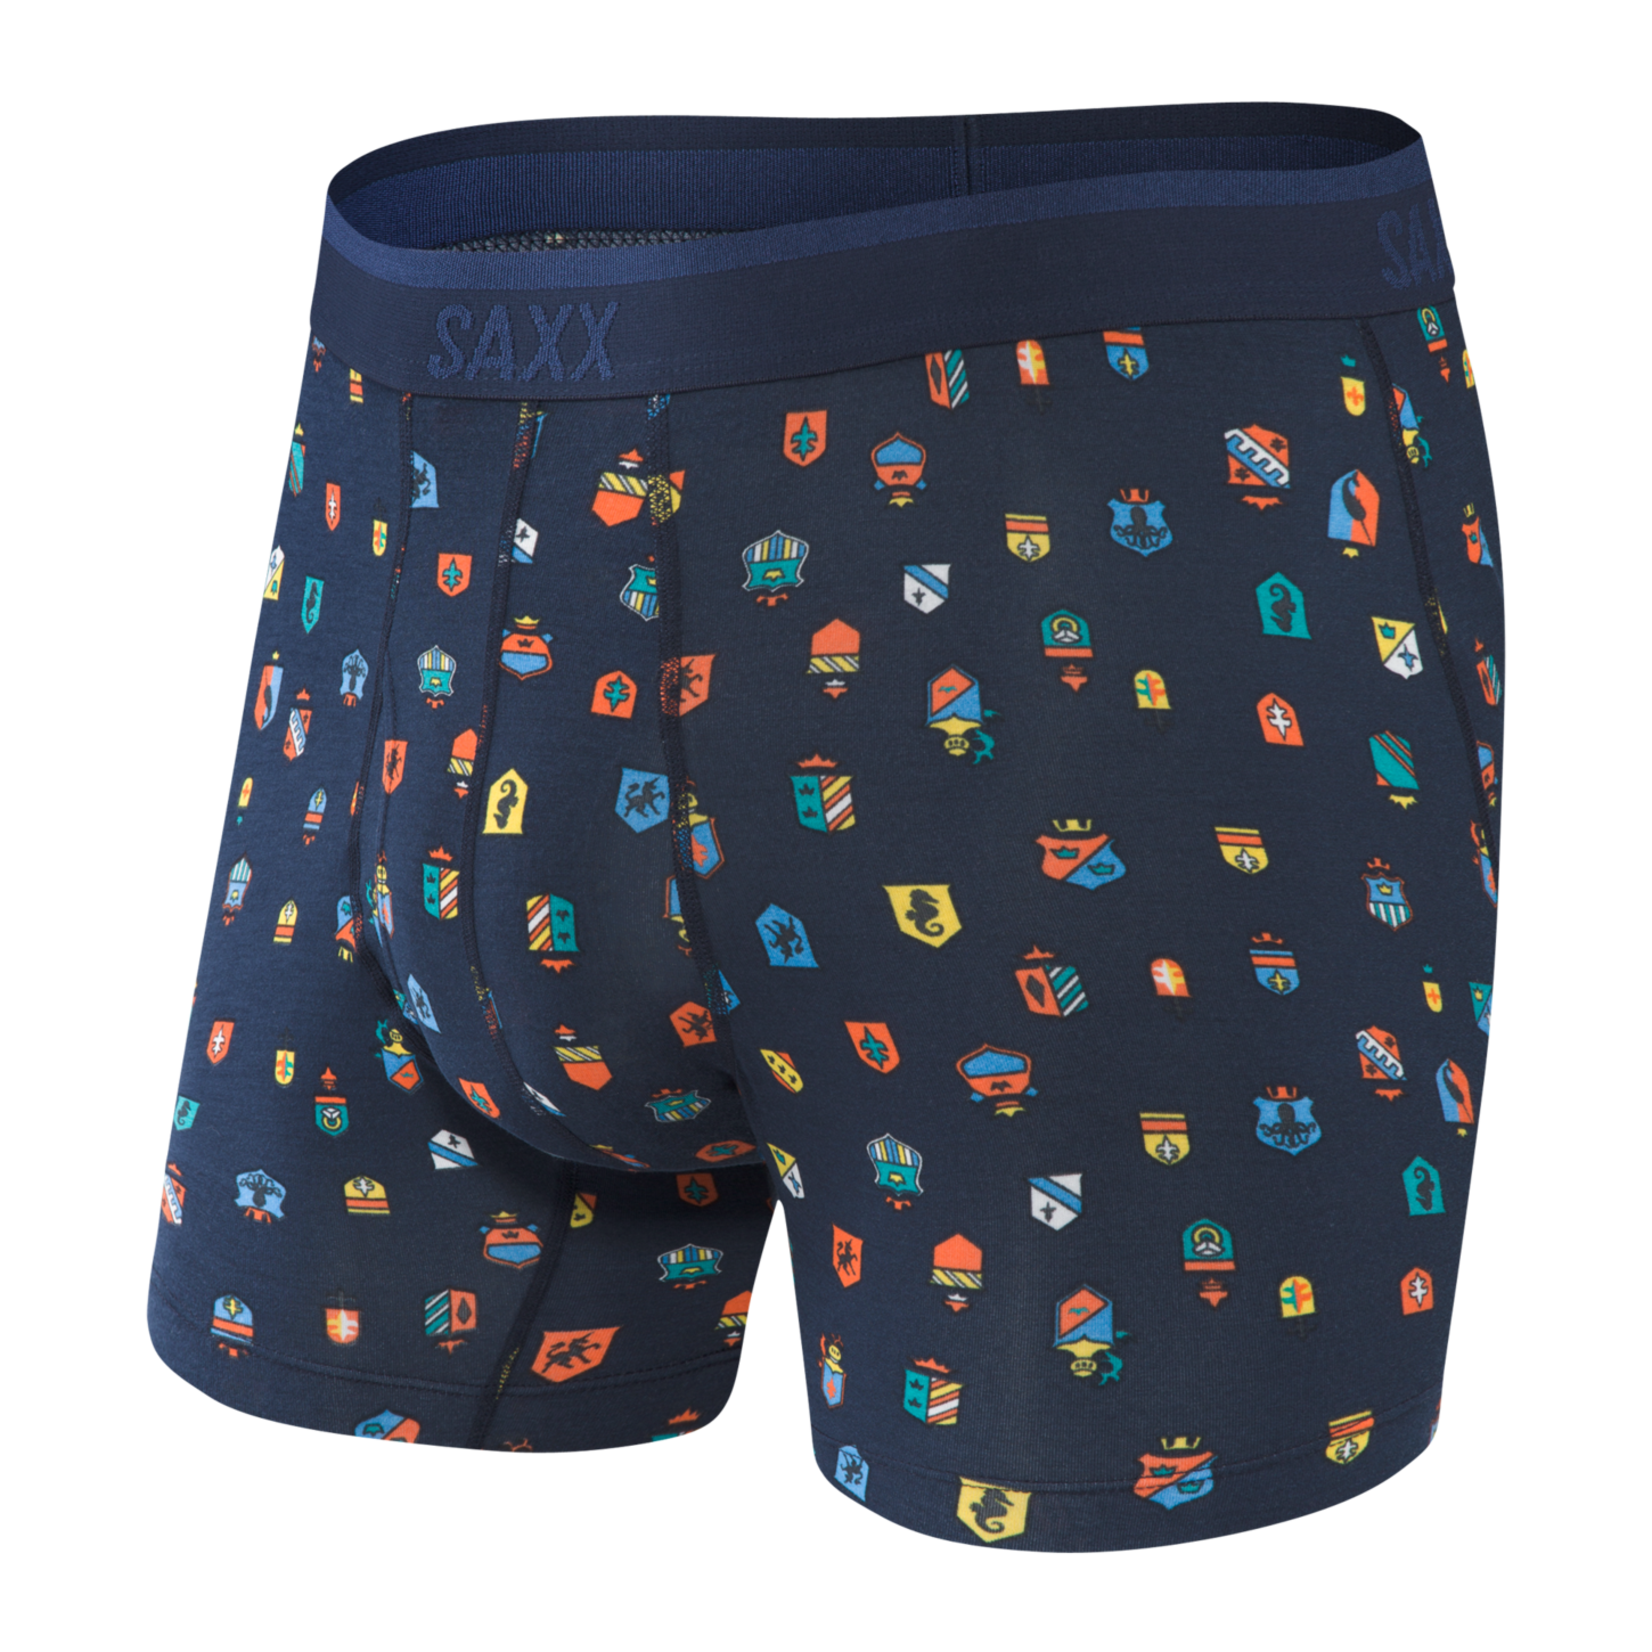 Saxx Saxx Underwear, Platinum Boxer Brief Fly, Mens, FJN-Nvy Family Jewels